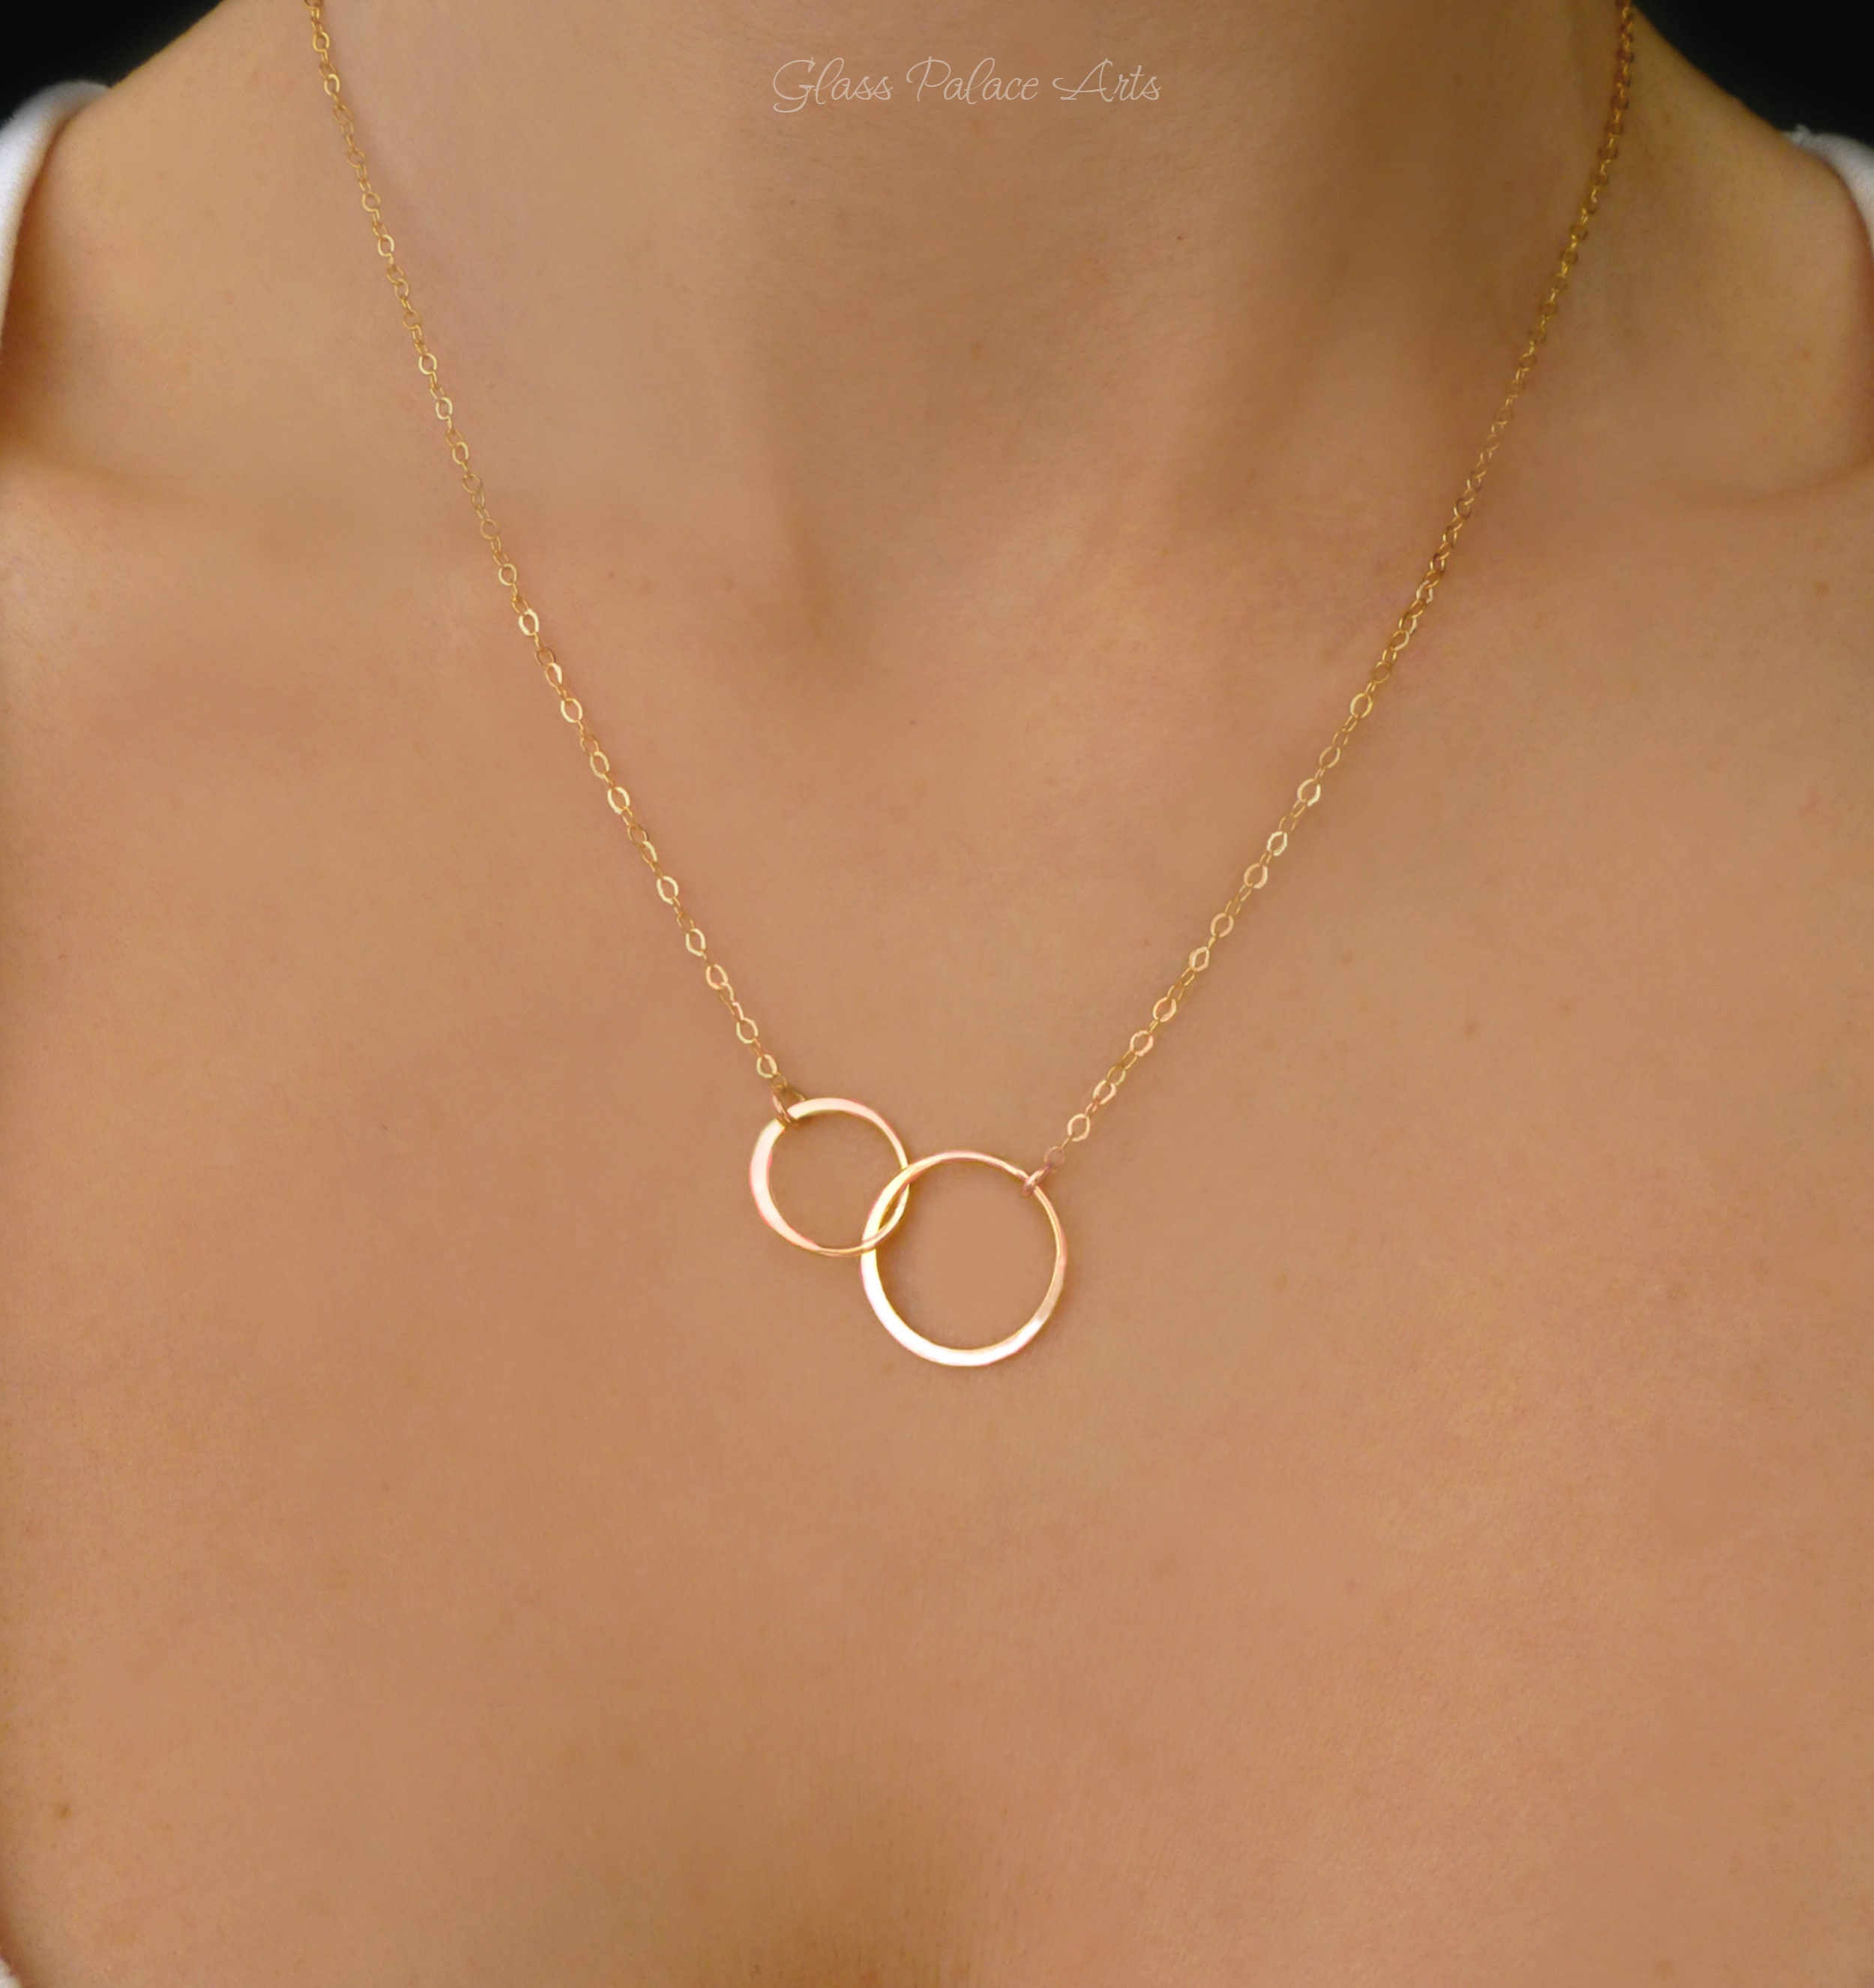 14k Yellow, White or Rose Gold Circle & Bar Lariat Necklace, 16-18 In. -  The Black Bow Jewelry Company